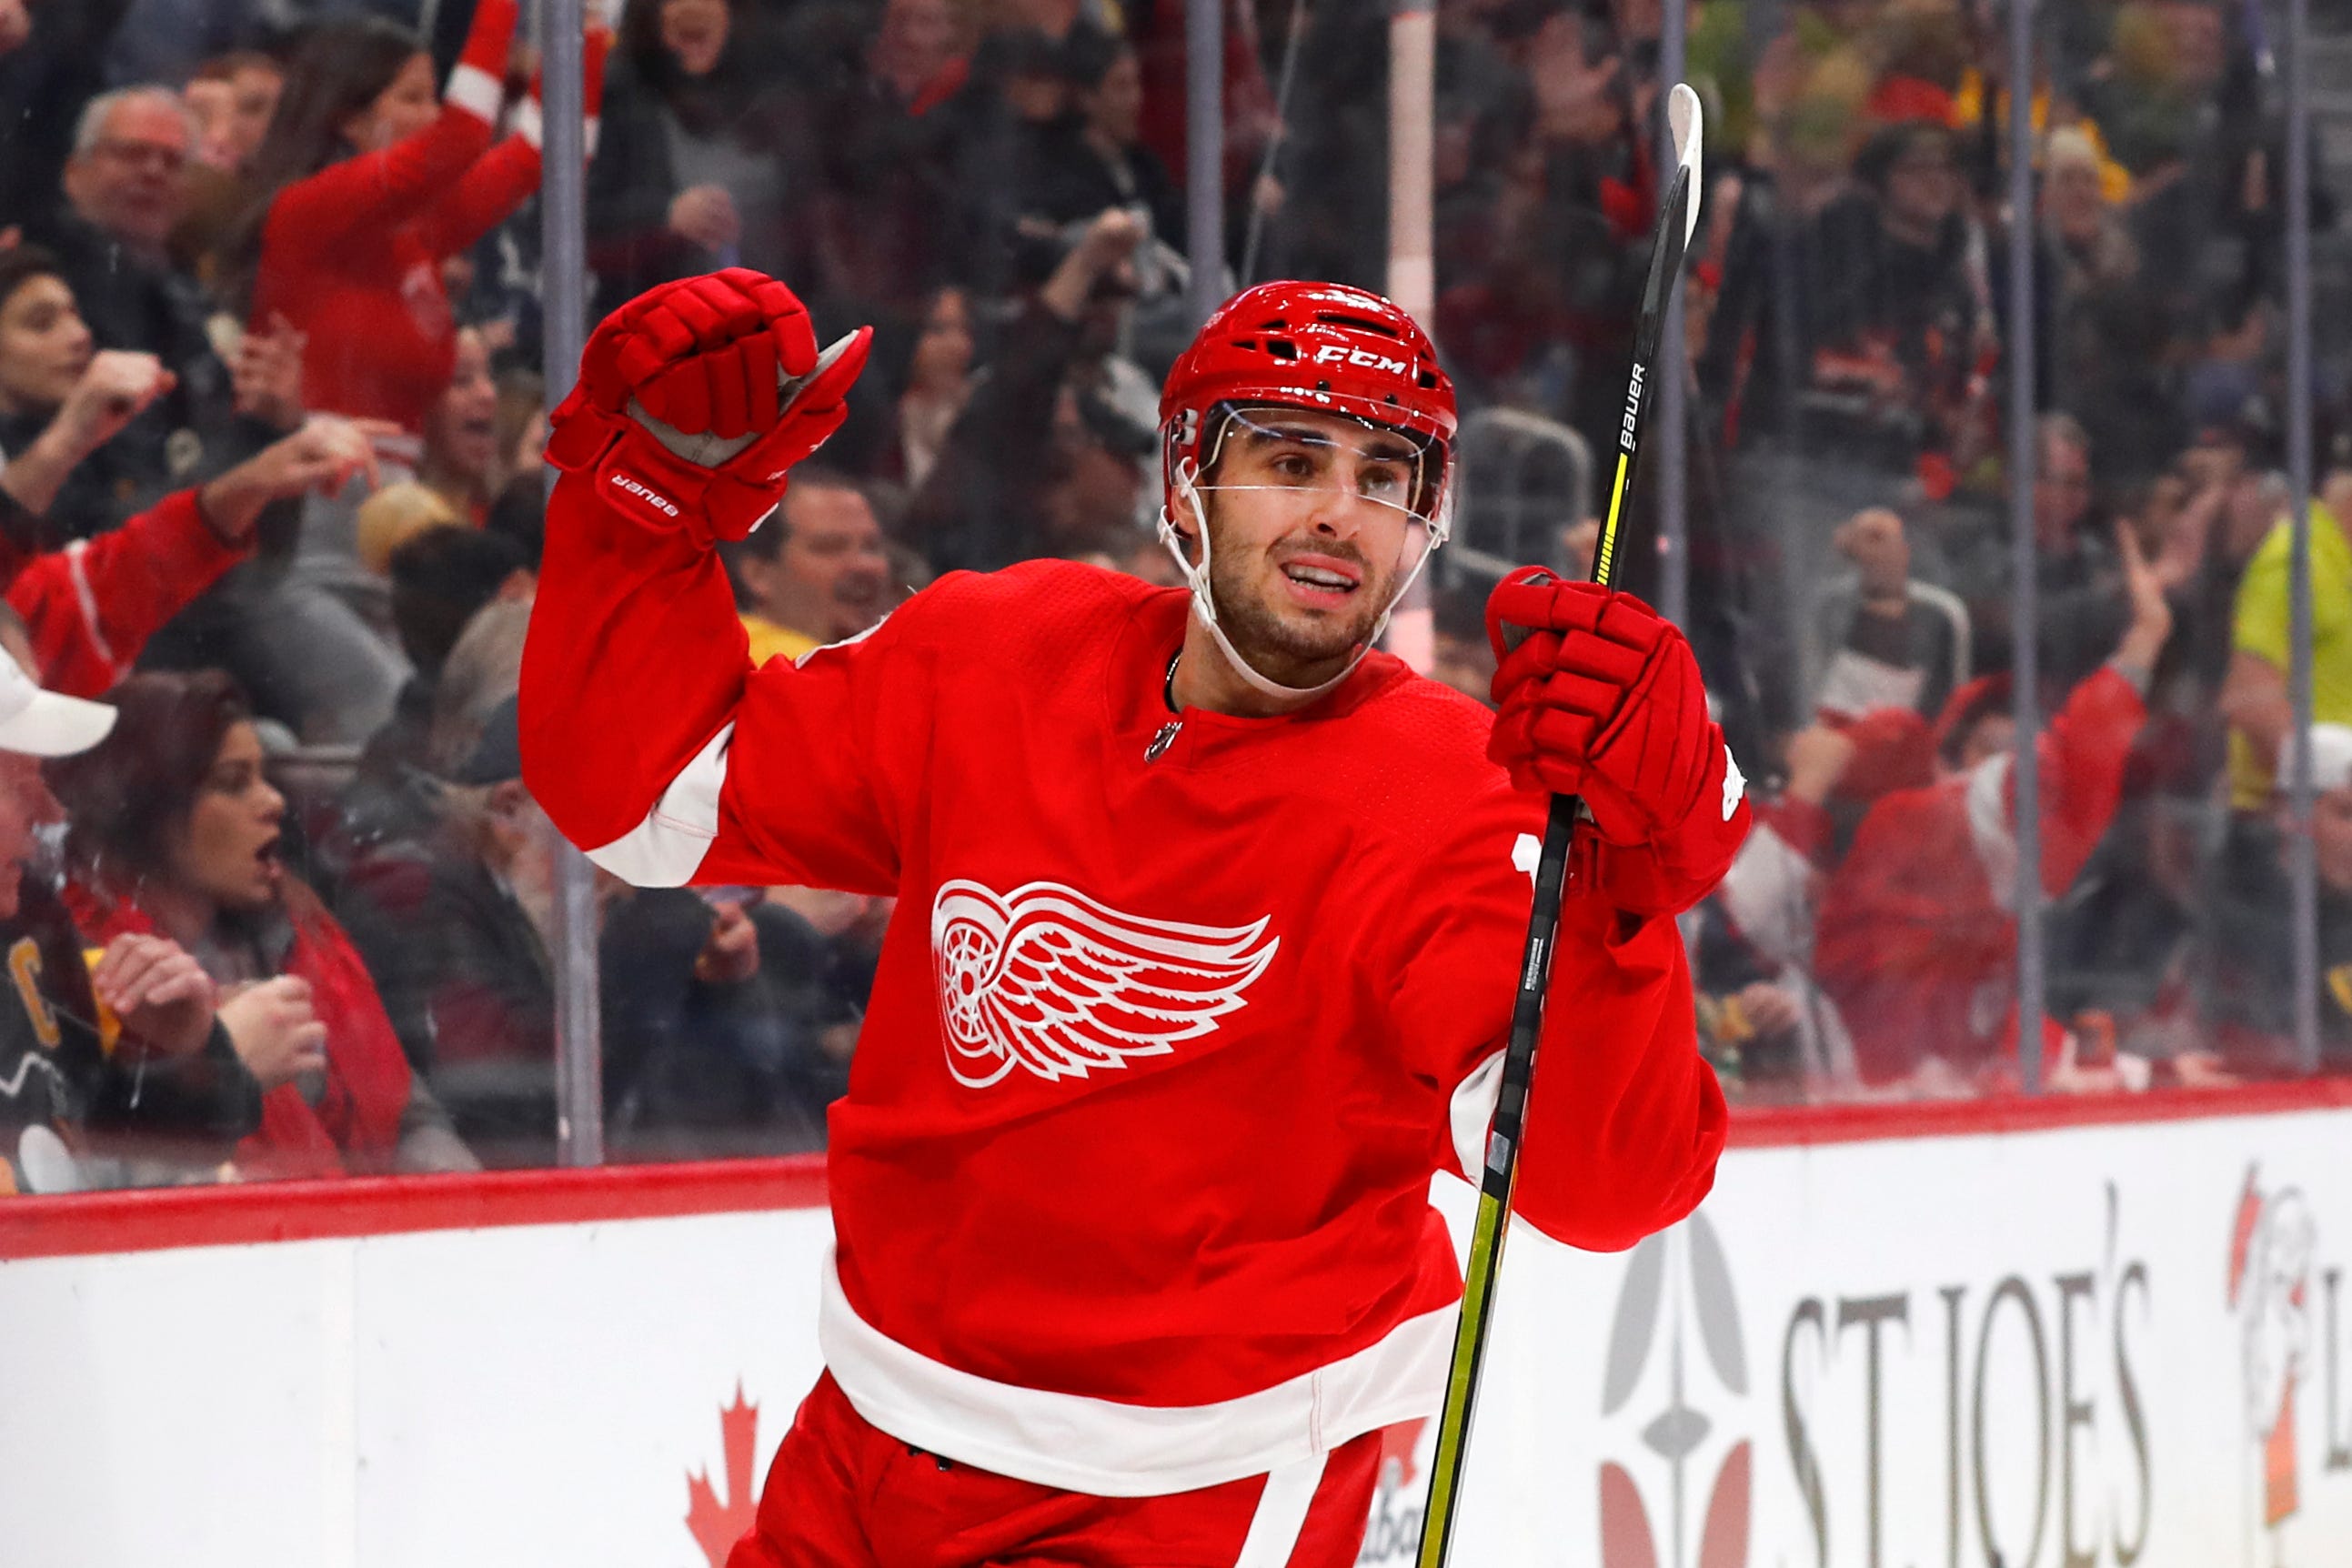 Detroit Red Wings center Robby Fabbri celebrates his goal against the Pittsburgh Penguins in the second period.